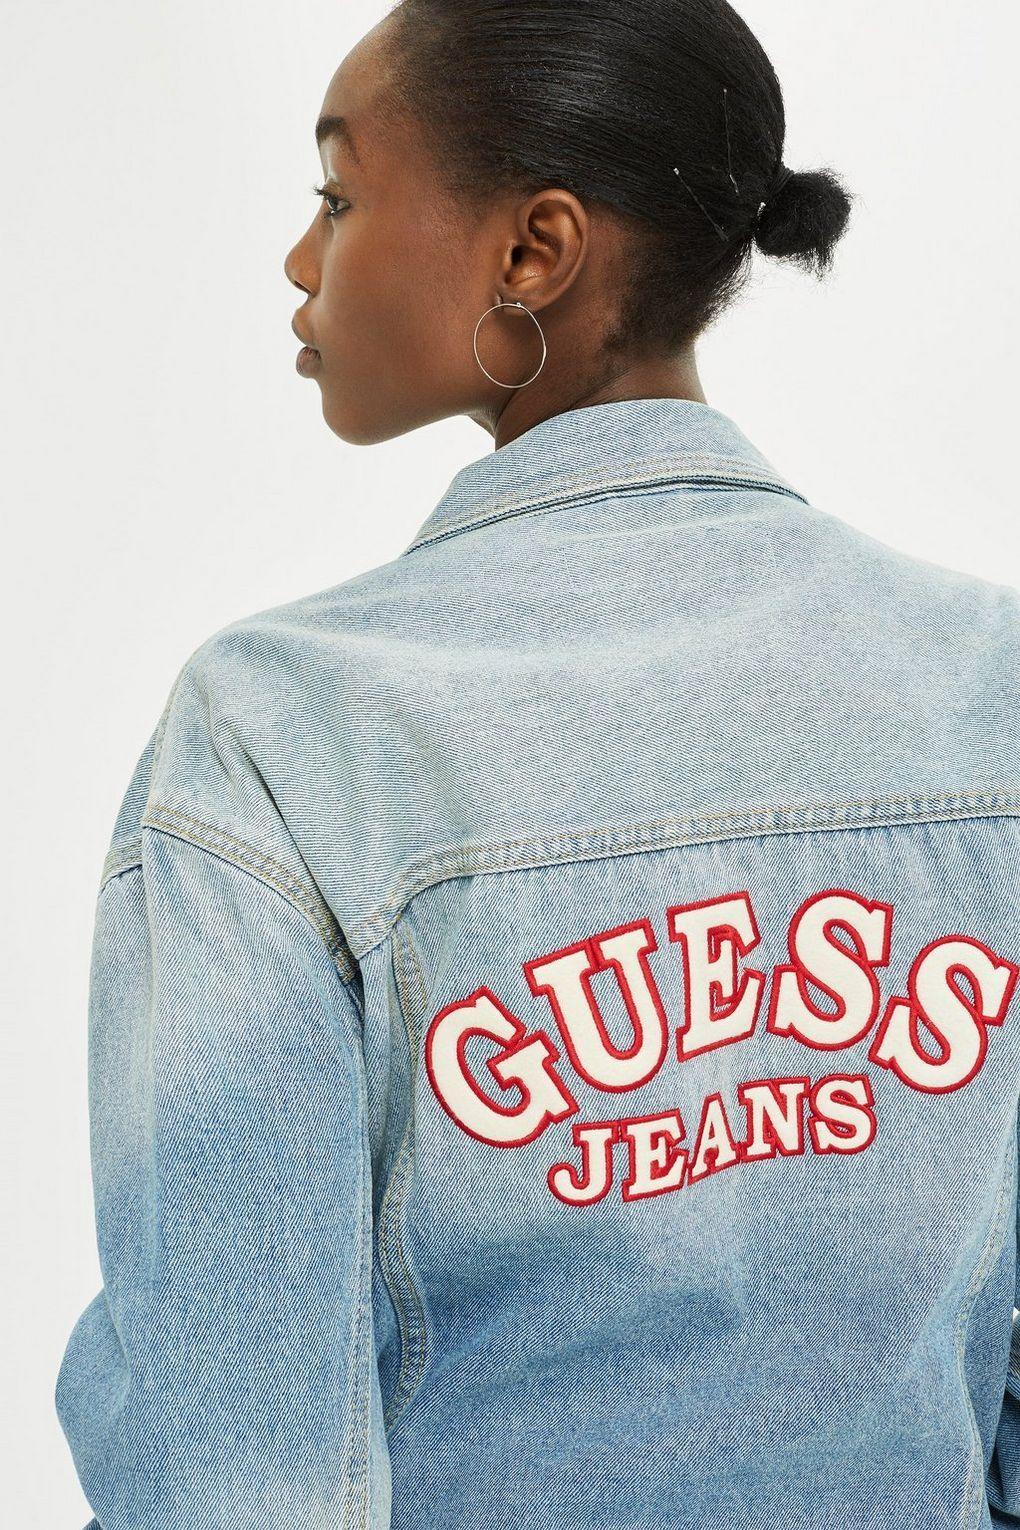 Guess Jeans Logo - Oversized Denim Logo Jacket by Guess Jeans - Topshop Malaysia